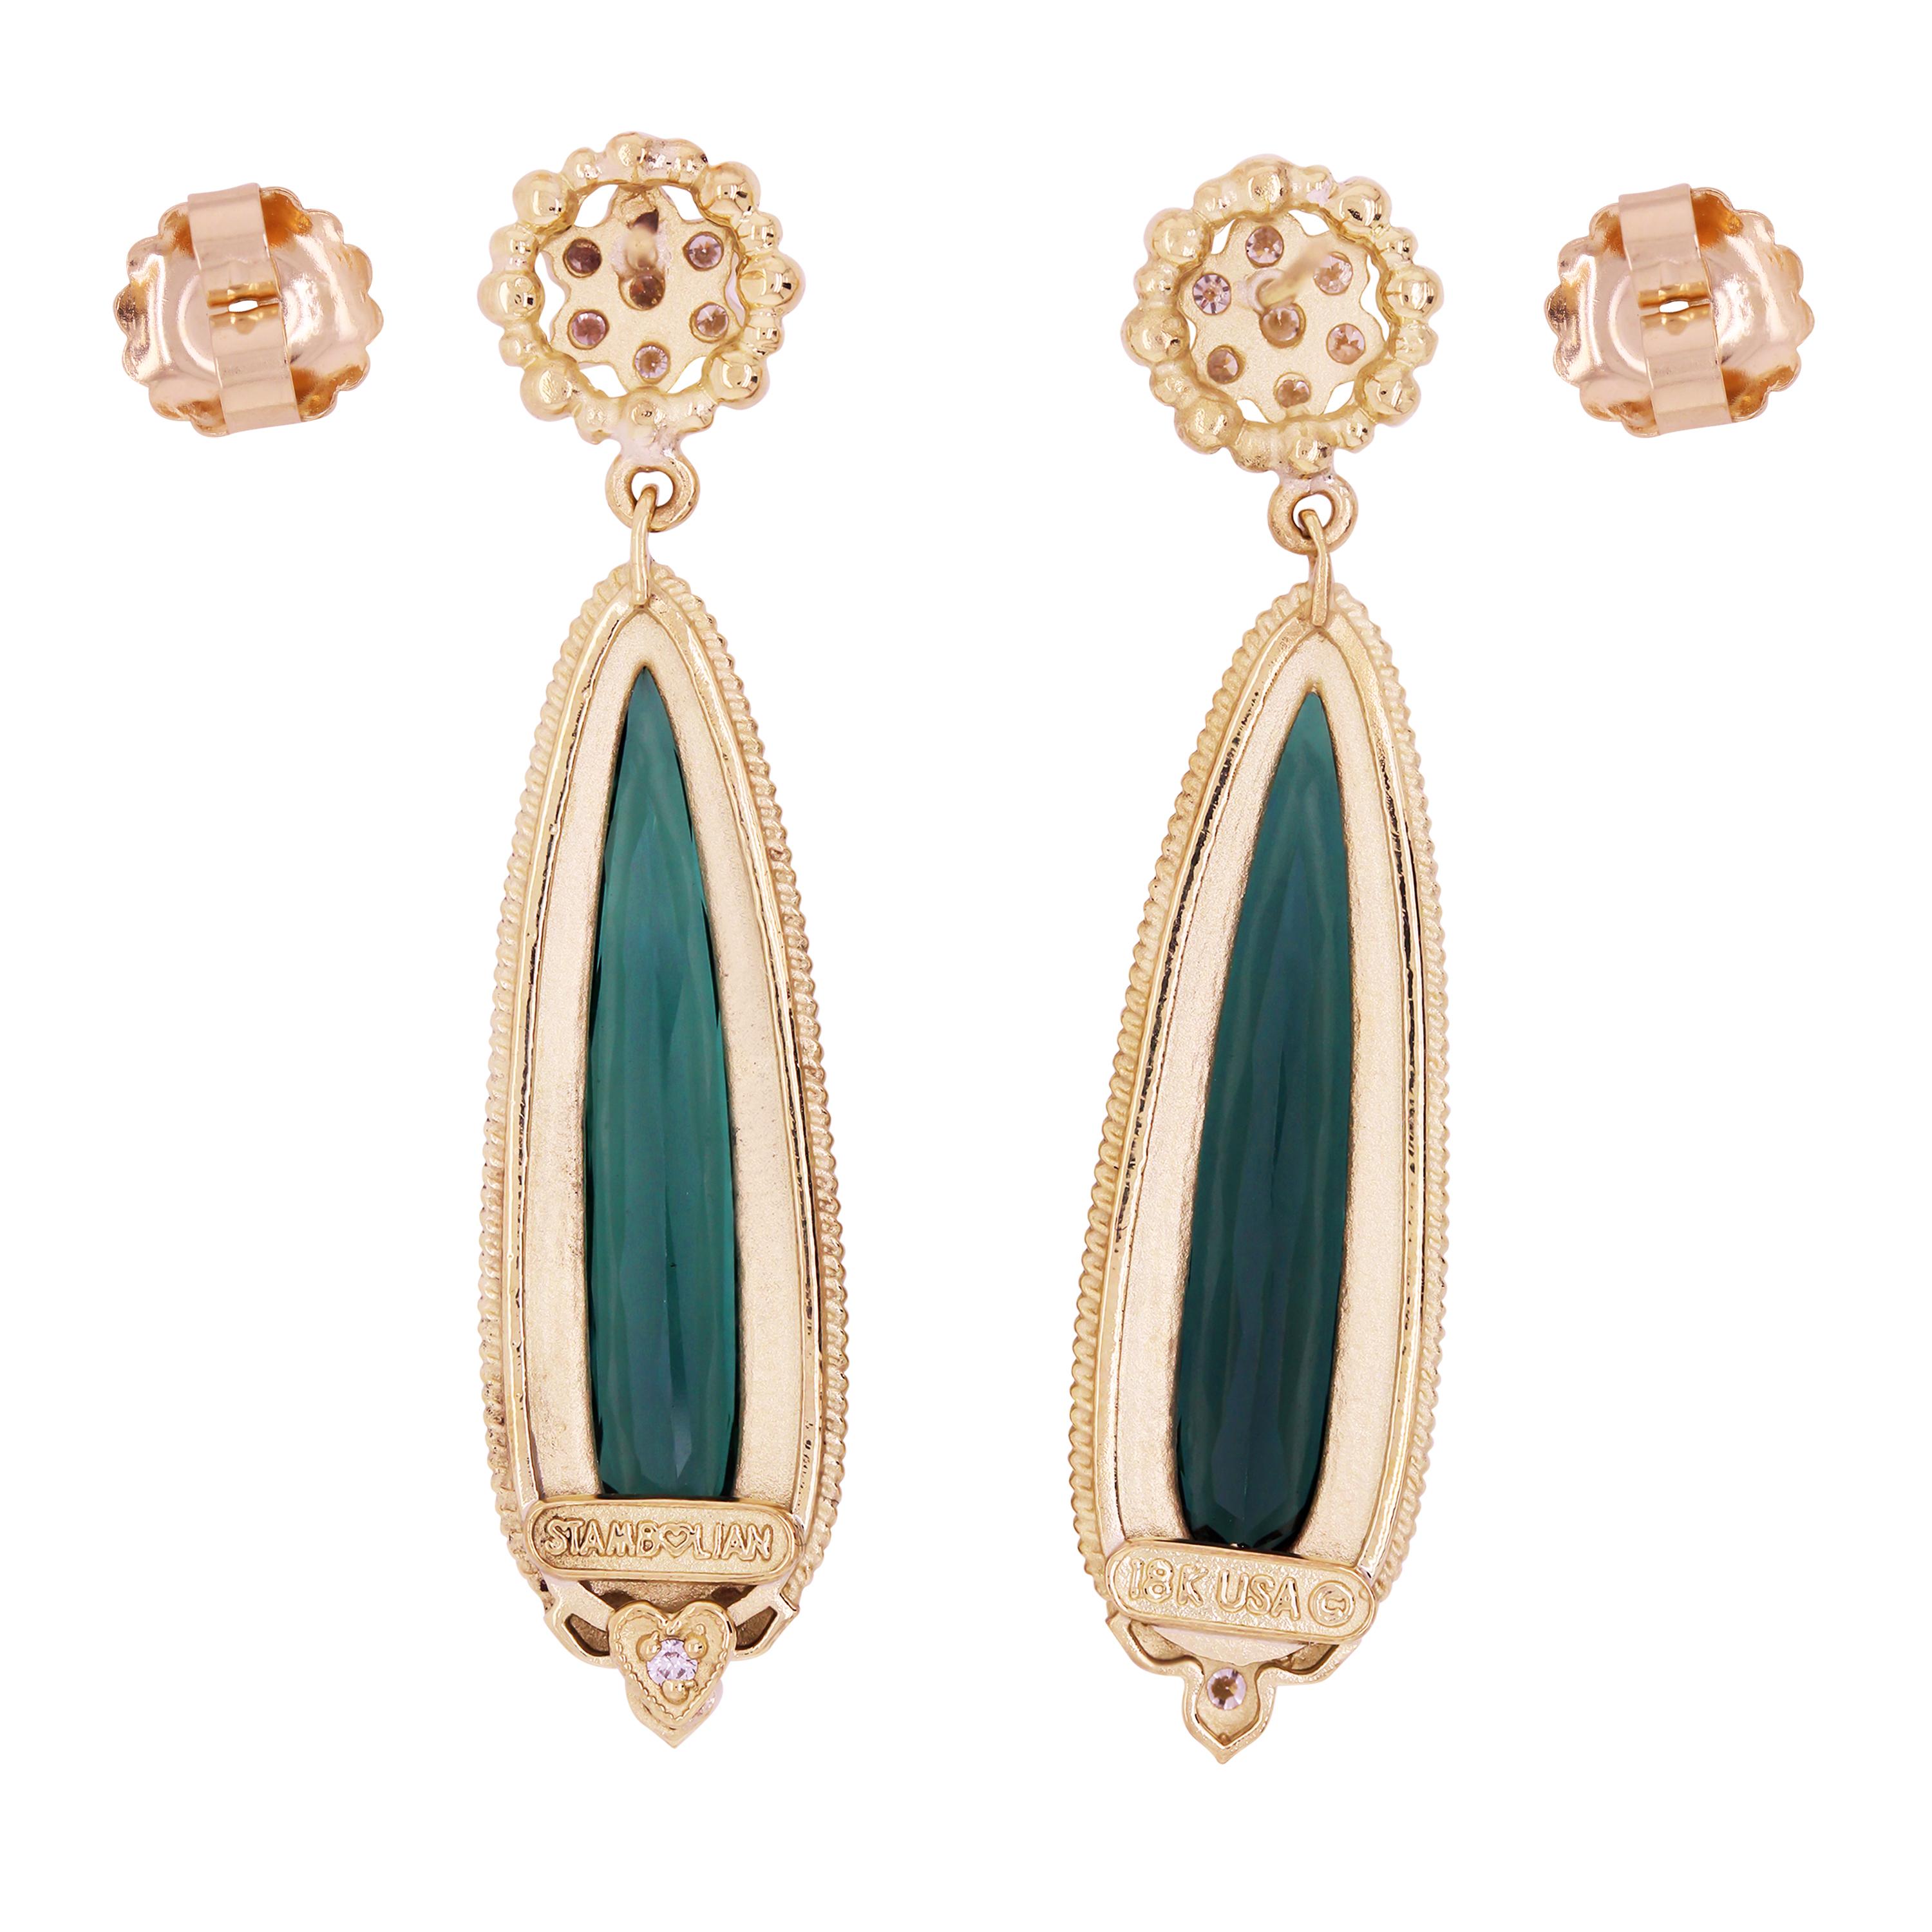 Stambolian 18K Yellow Gold Diamond Pear Shape Green Tourmaline Drop Earrings

This one-of-a-kind pair of earrings by Stambolian is a true statement piece brings to life the combination of natural beauty along with art showcasing the craftsmanship